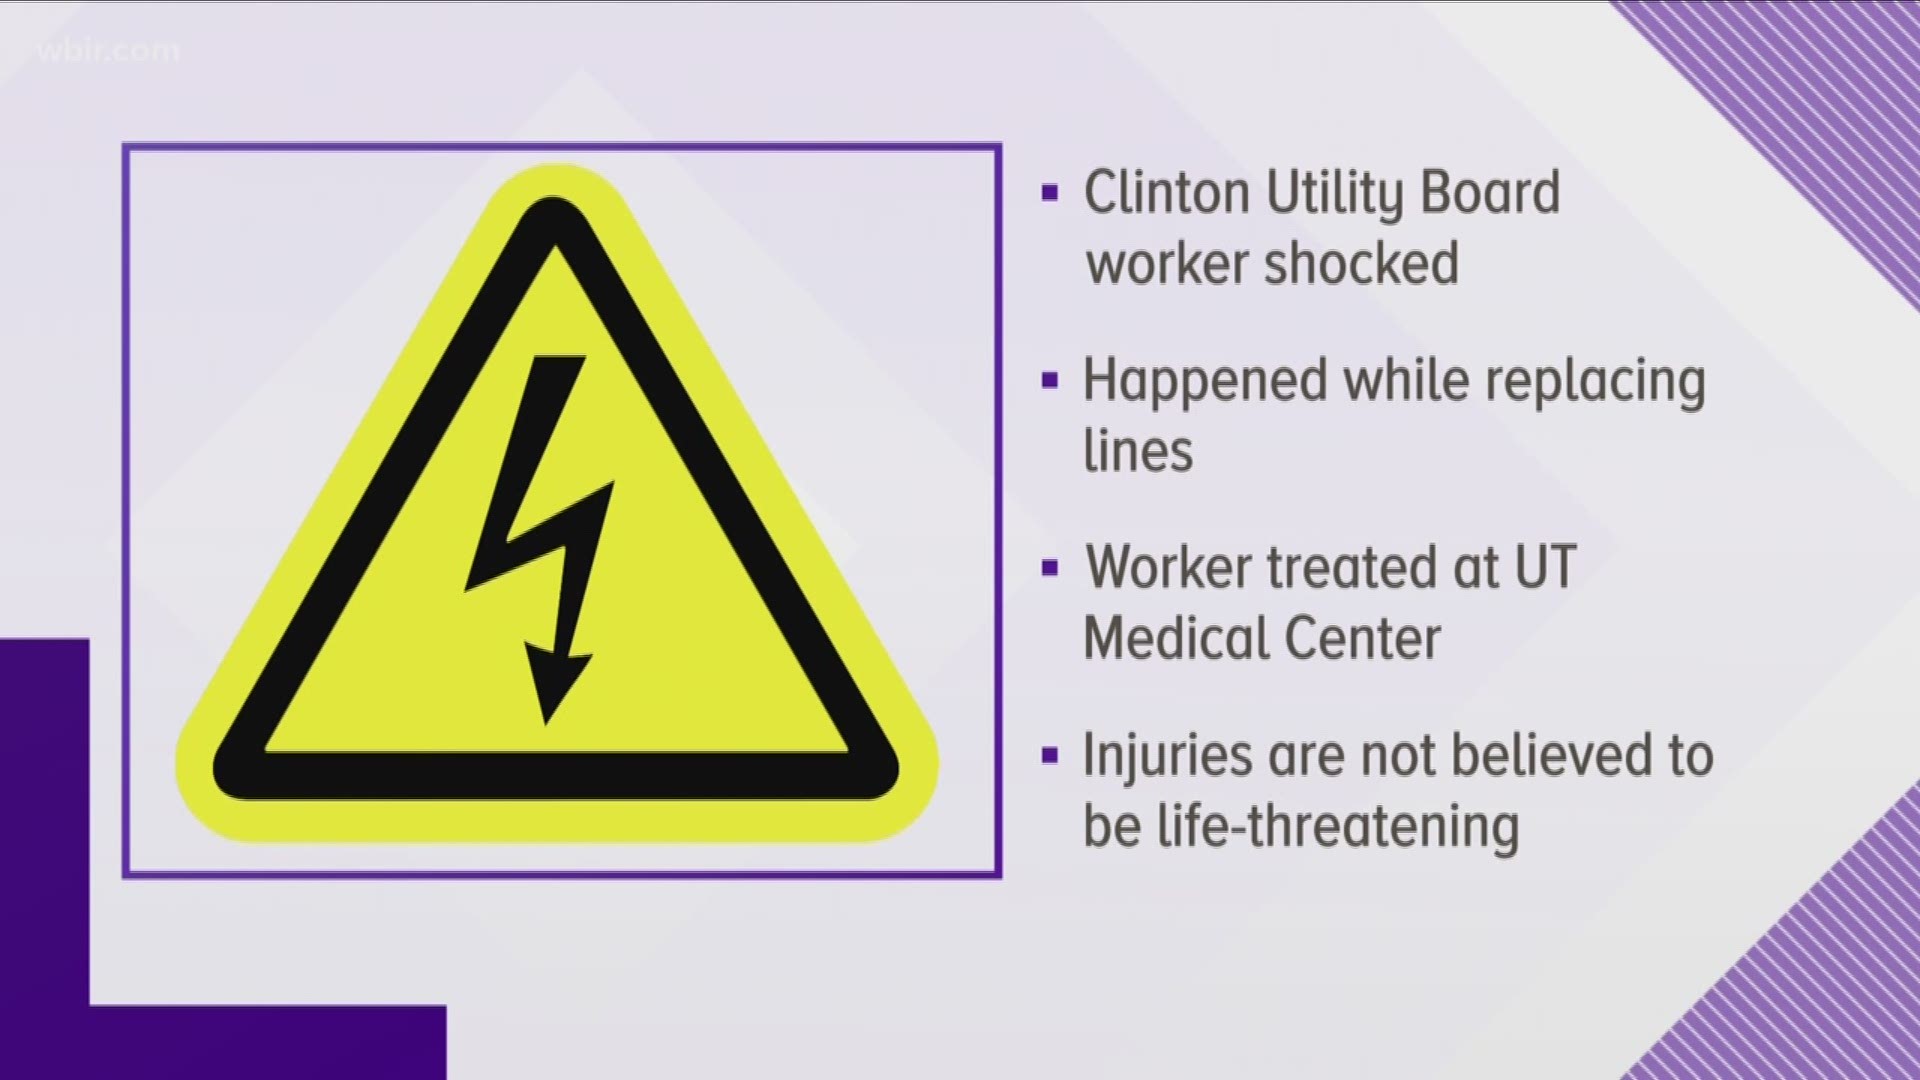 The Clinton Utilities Board said the worker had been shocked and burned while replacing a power line.